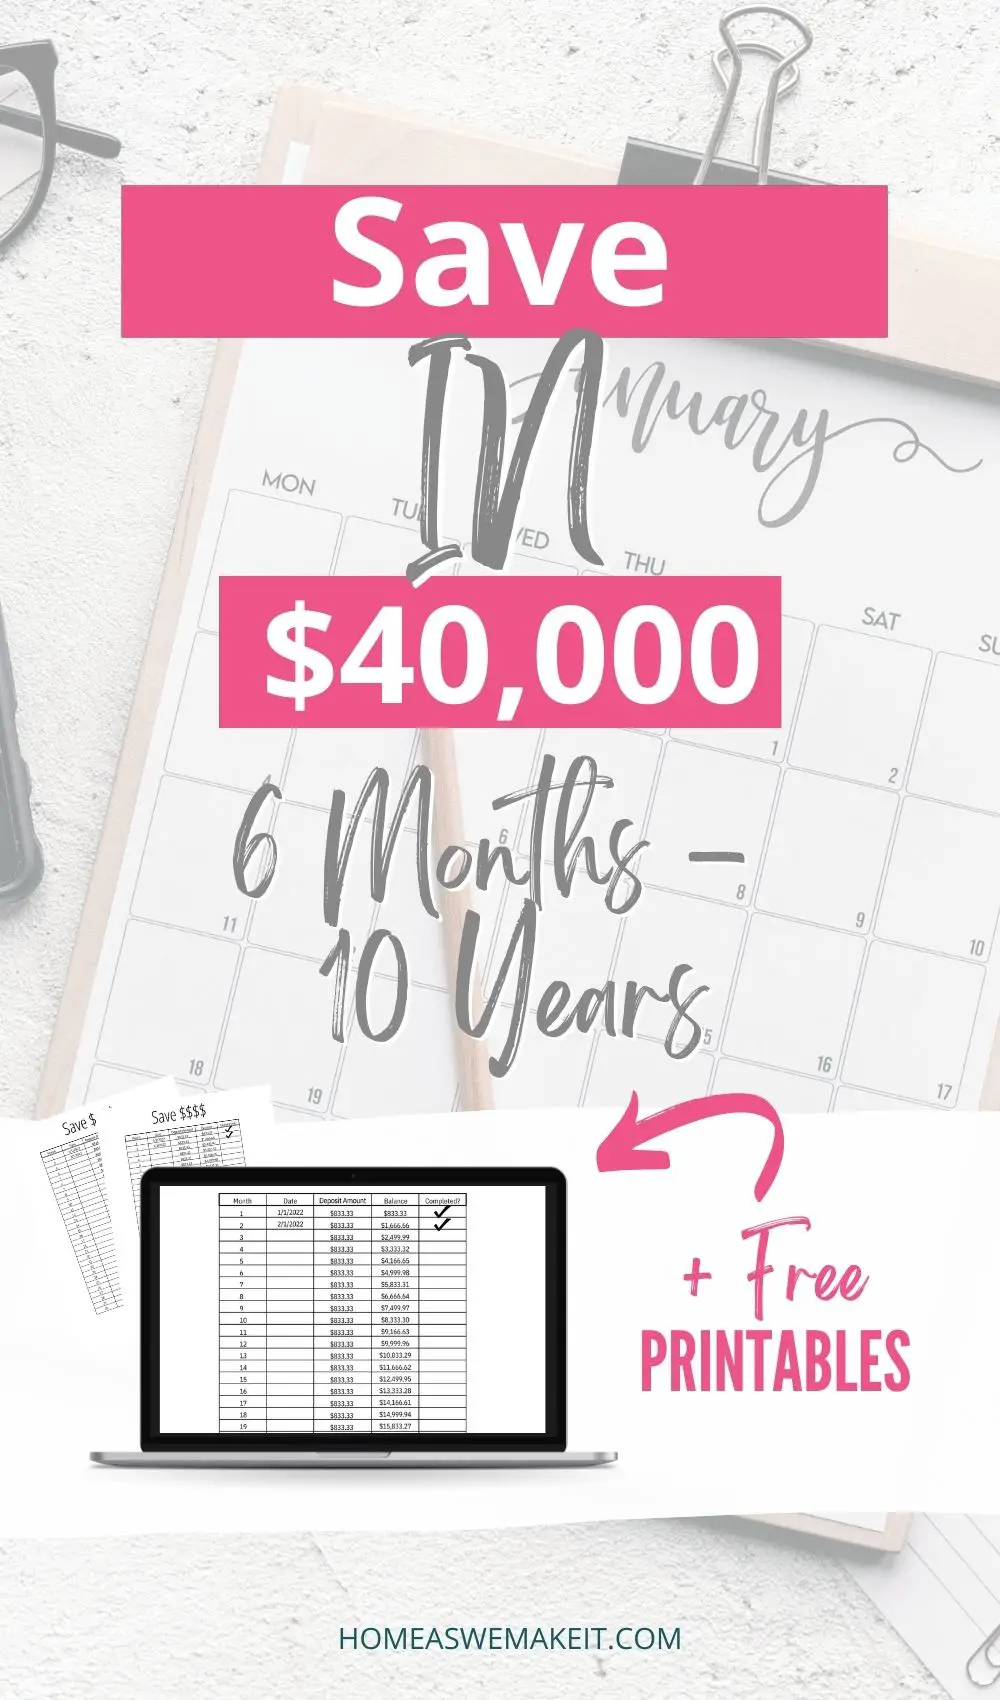 Save $40,000 in 6 months to 1 year with free printable savings trackers